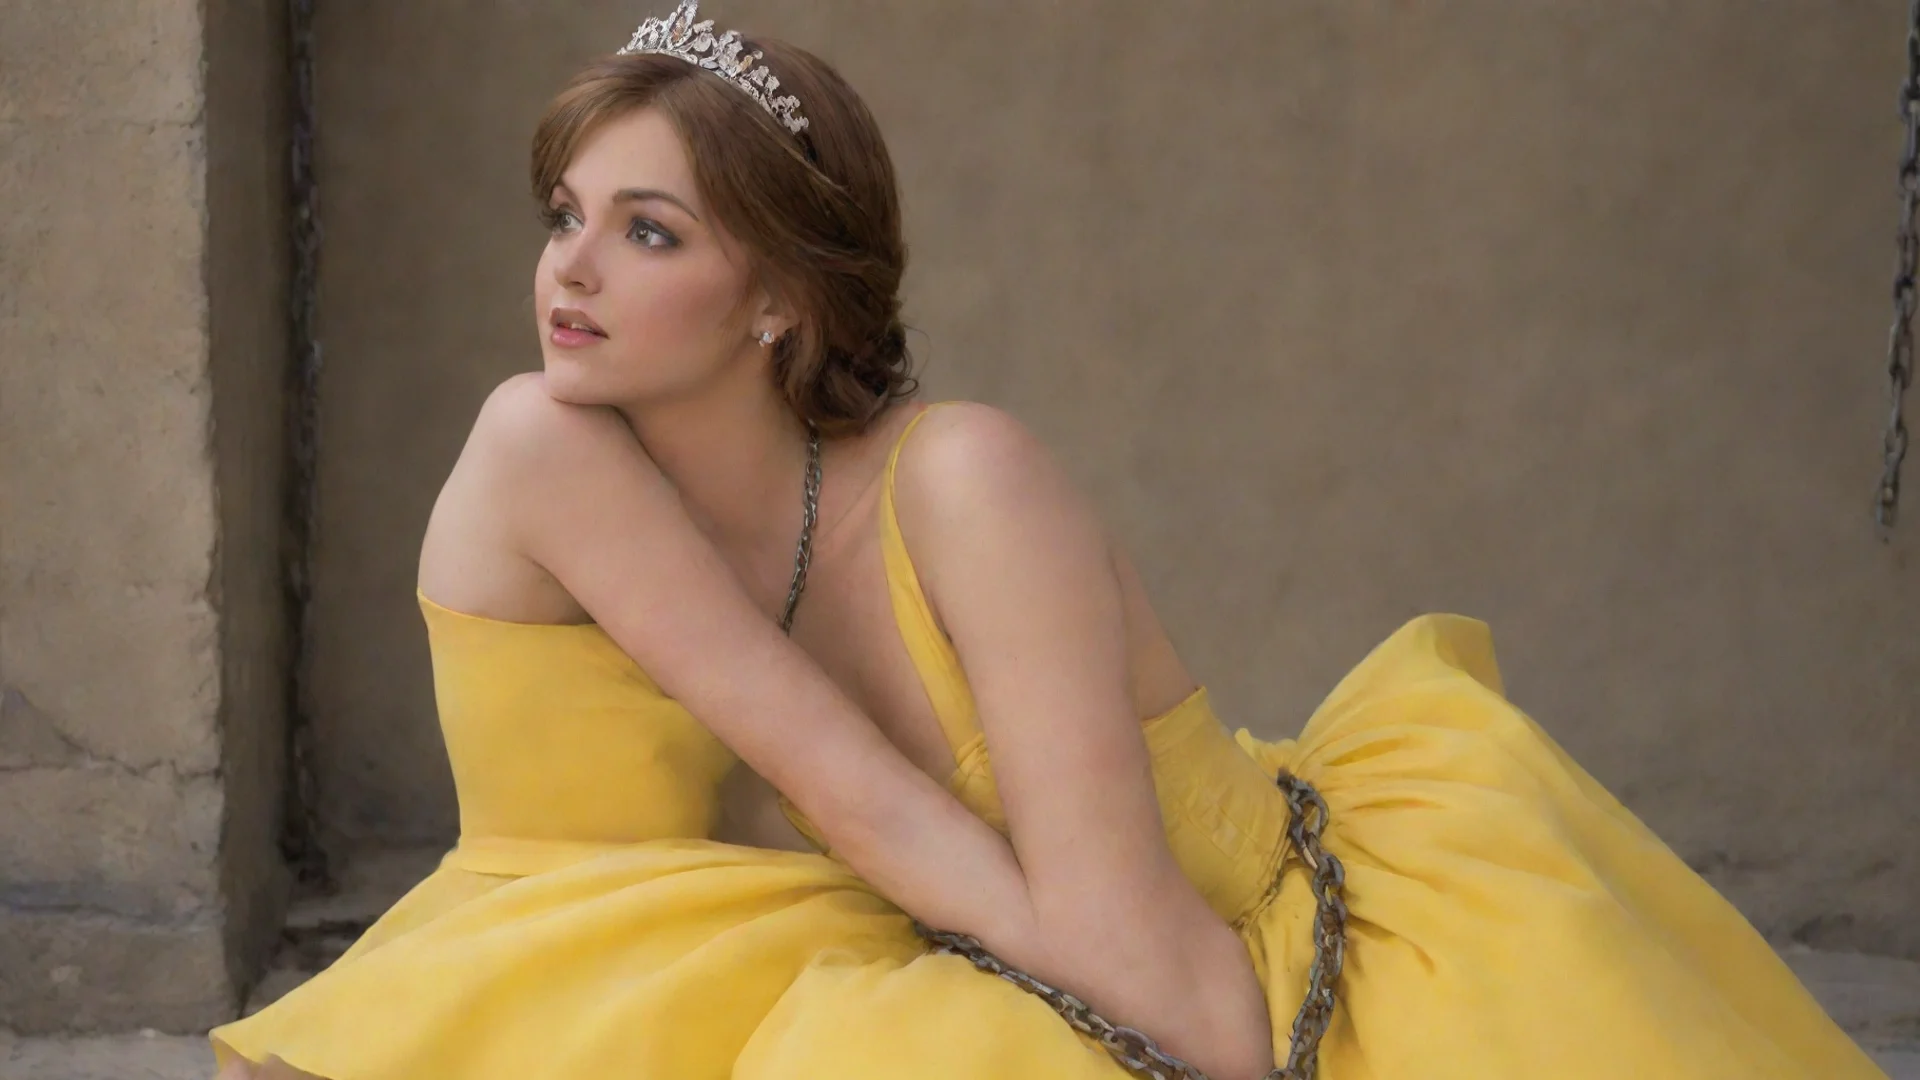 princess daisy restrained by chains in her yellow dress wide